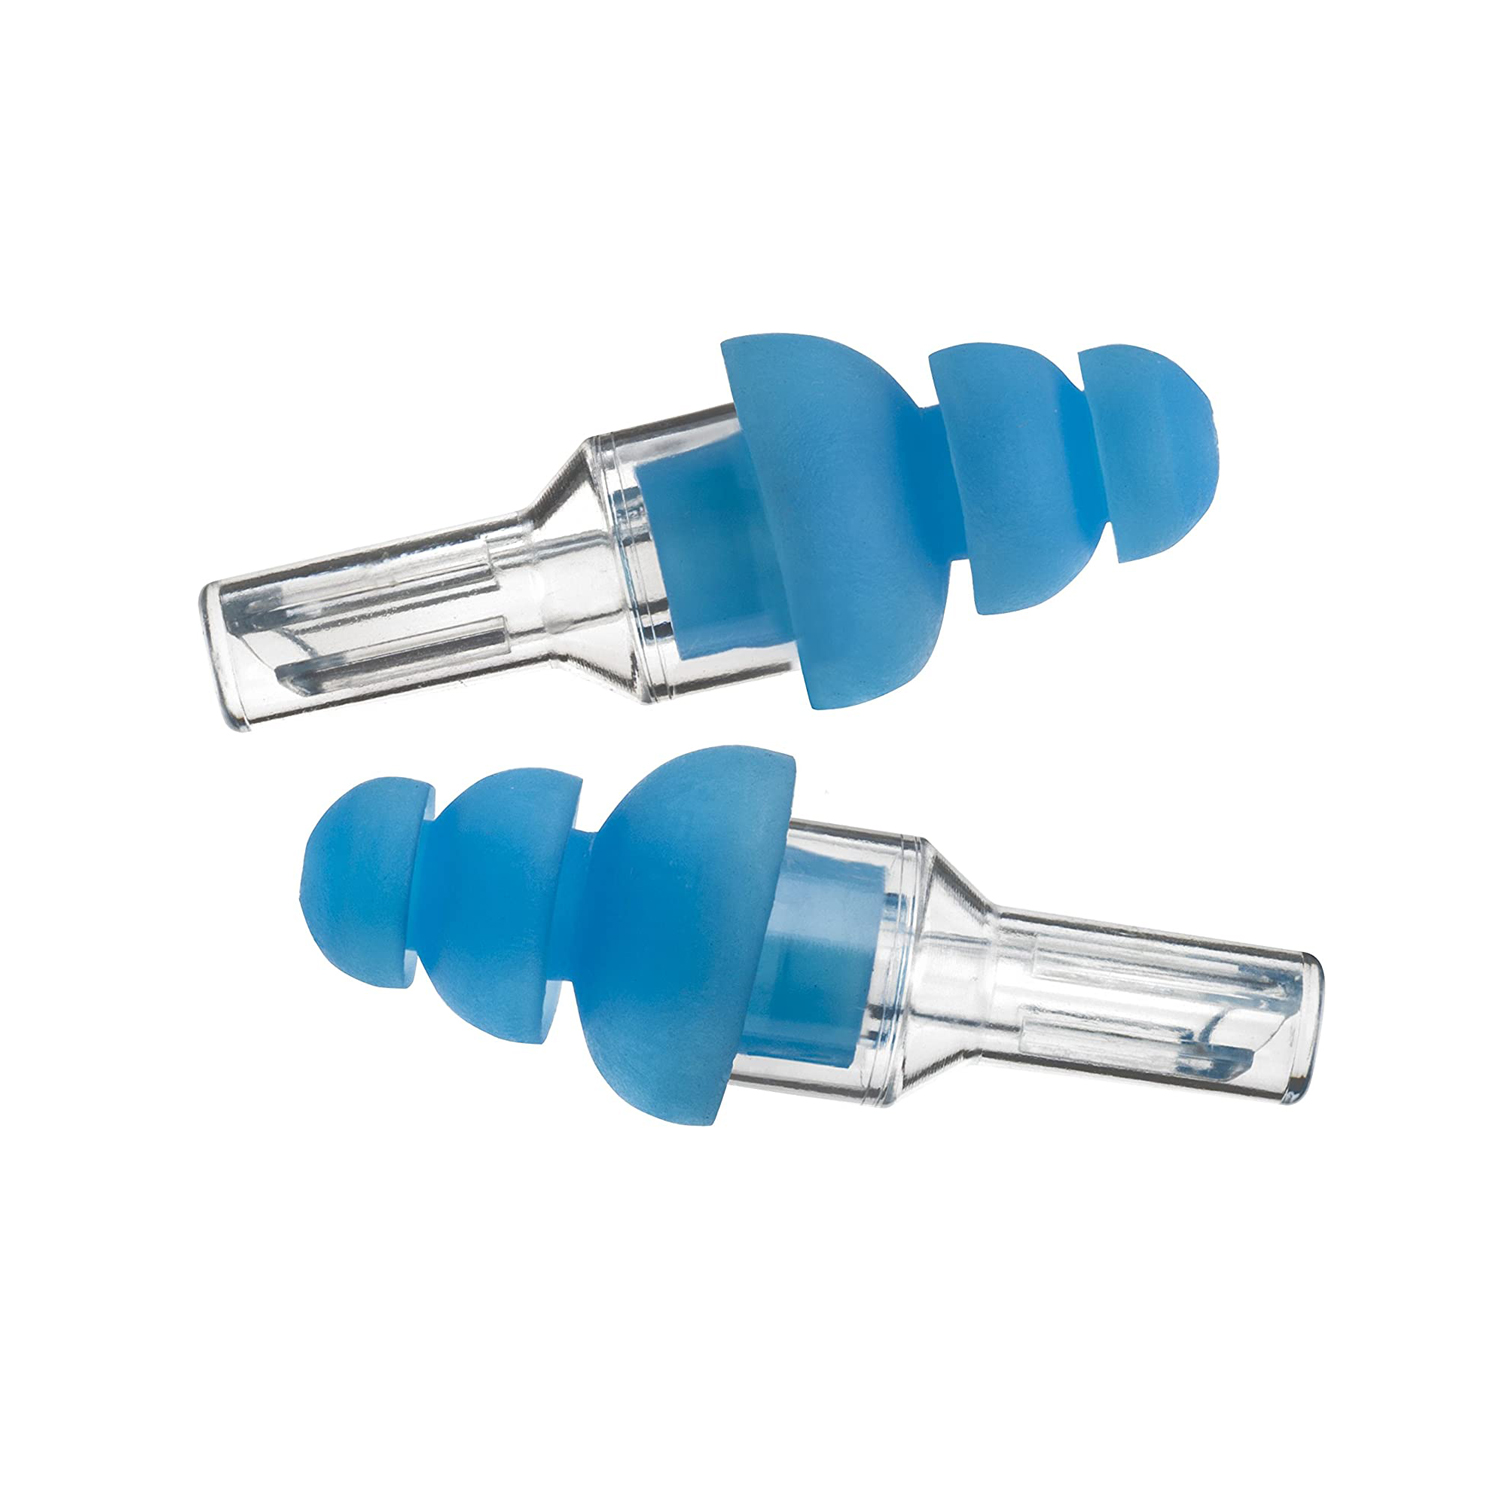 Product image of Etymotic Research ER20 High-Fidelity Earplugs on a white background